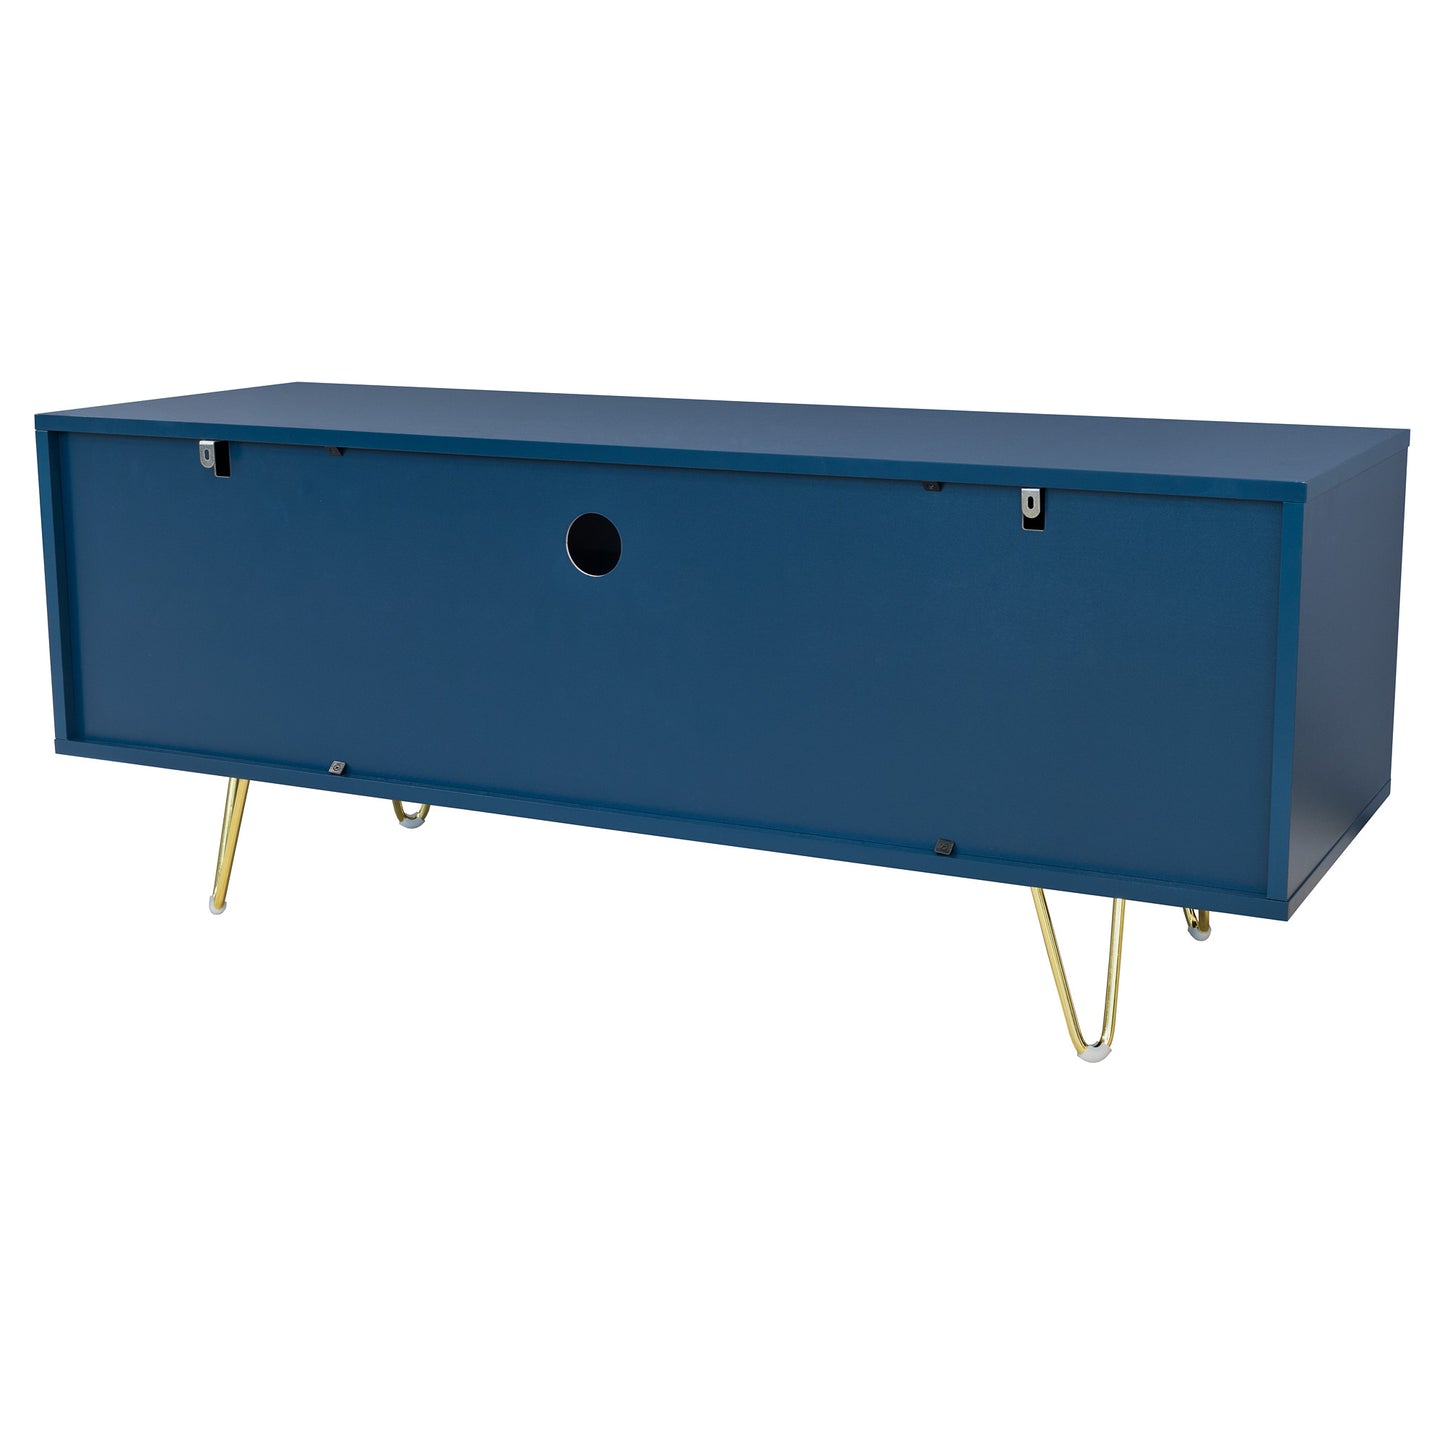 120cm wide Blue TV stand for up to 60” TV, Blue tv stand with Gold metal legs